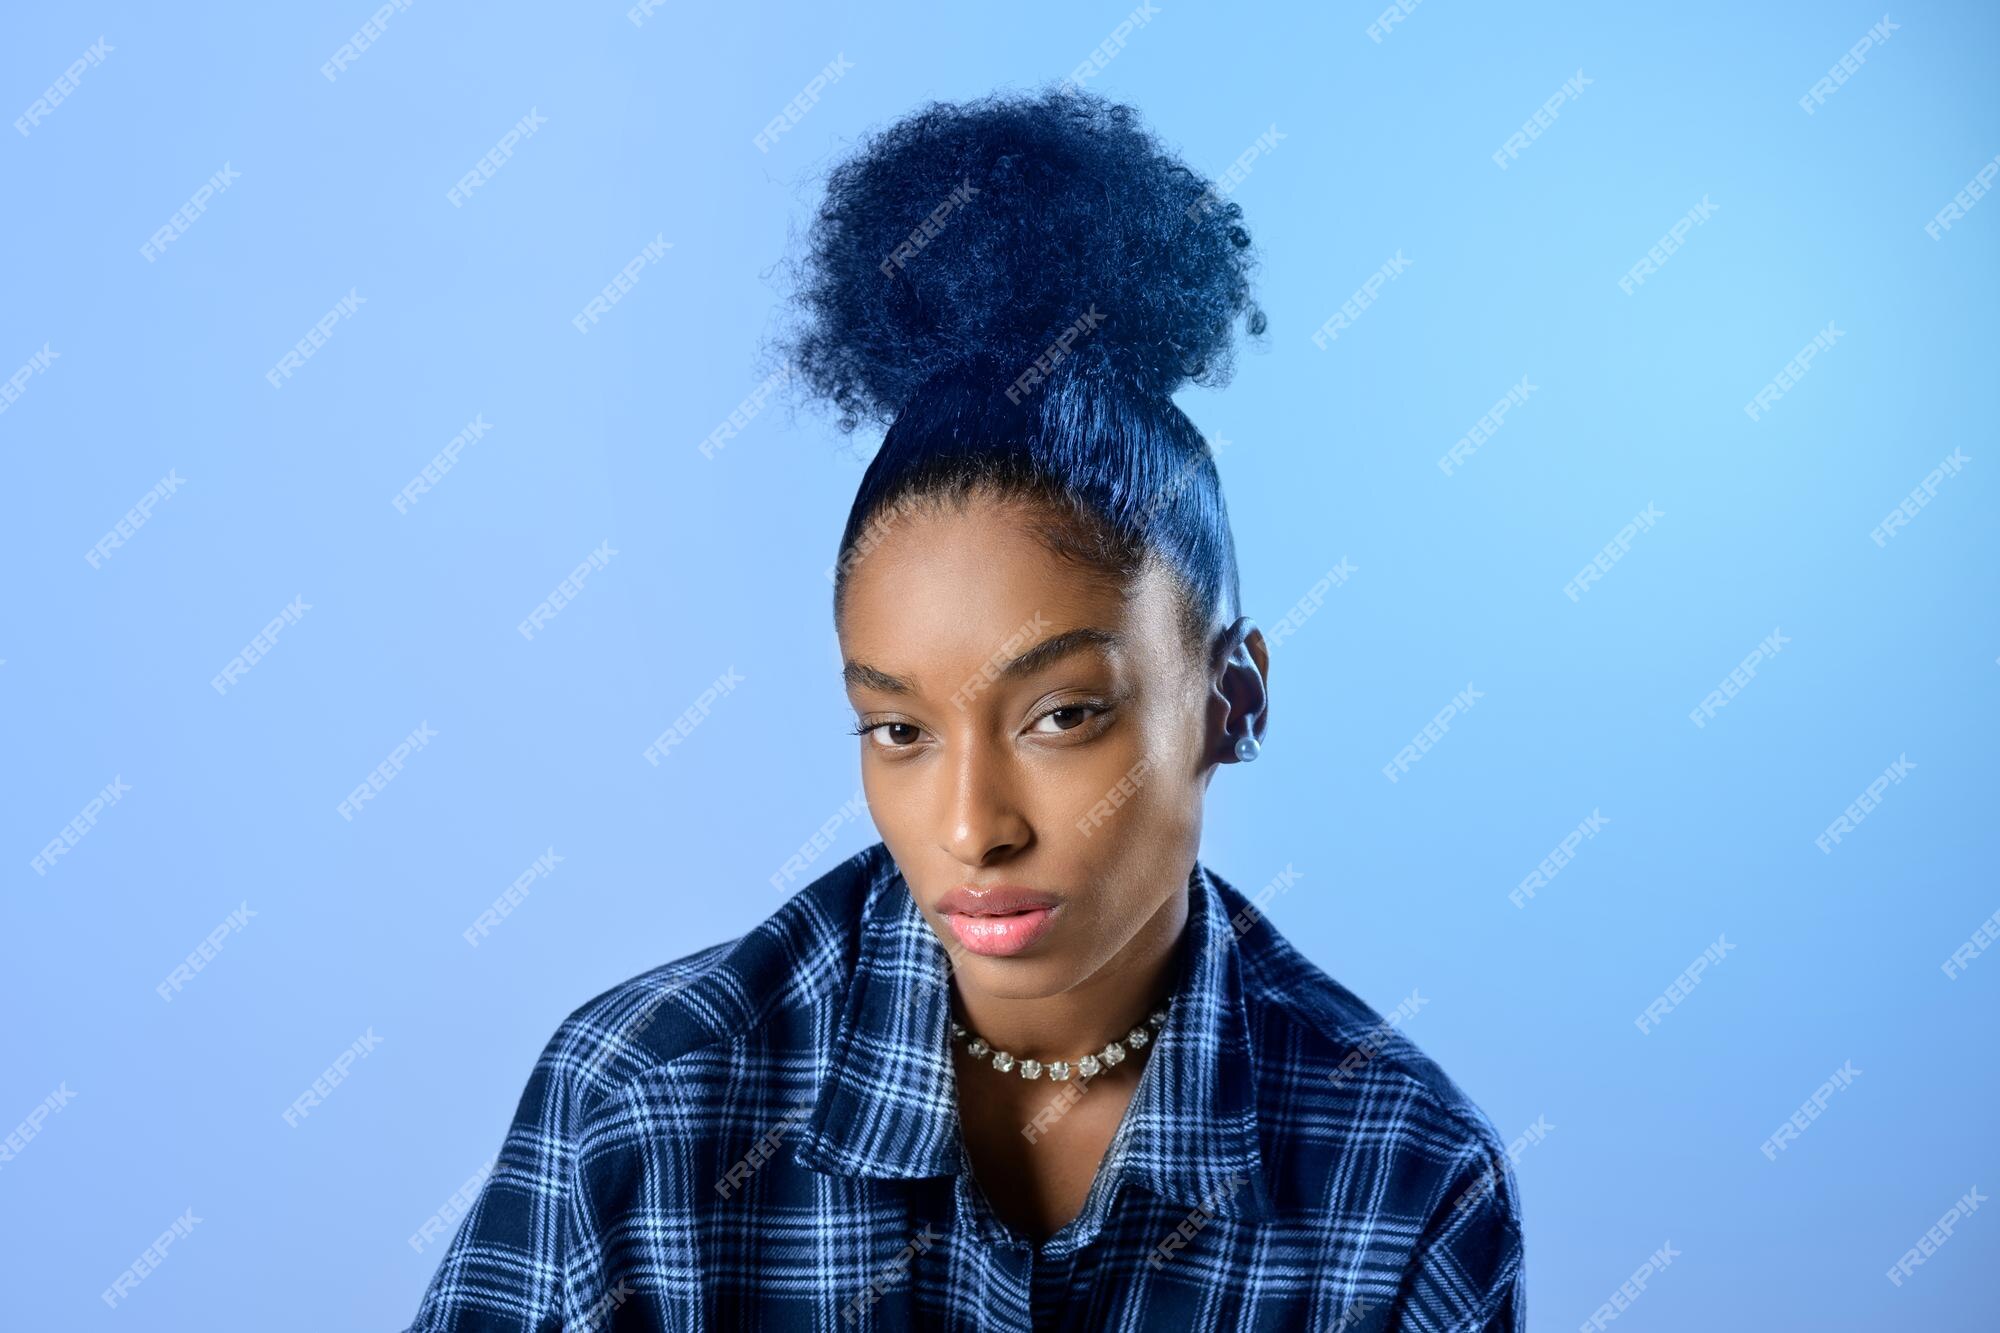 Premium Photo | Attractive young black woman with her curly hair tied on  top of her head in a bun over a blue background